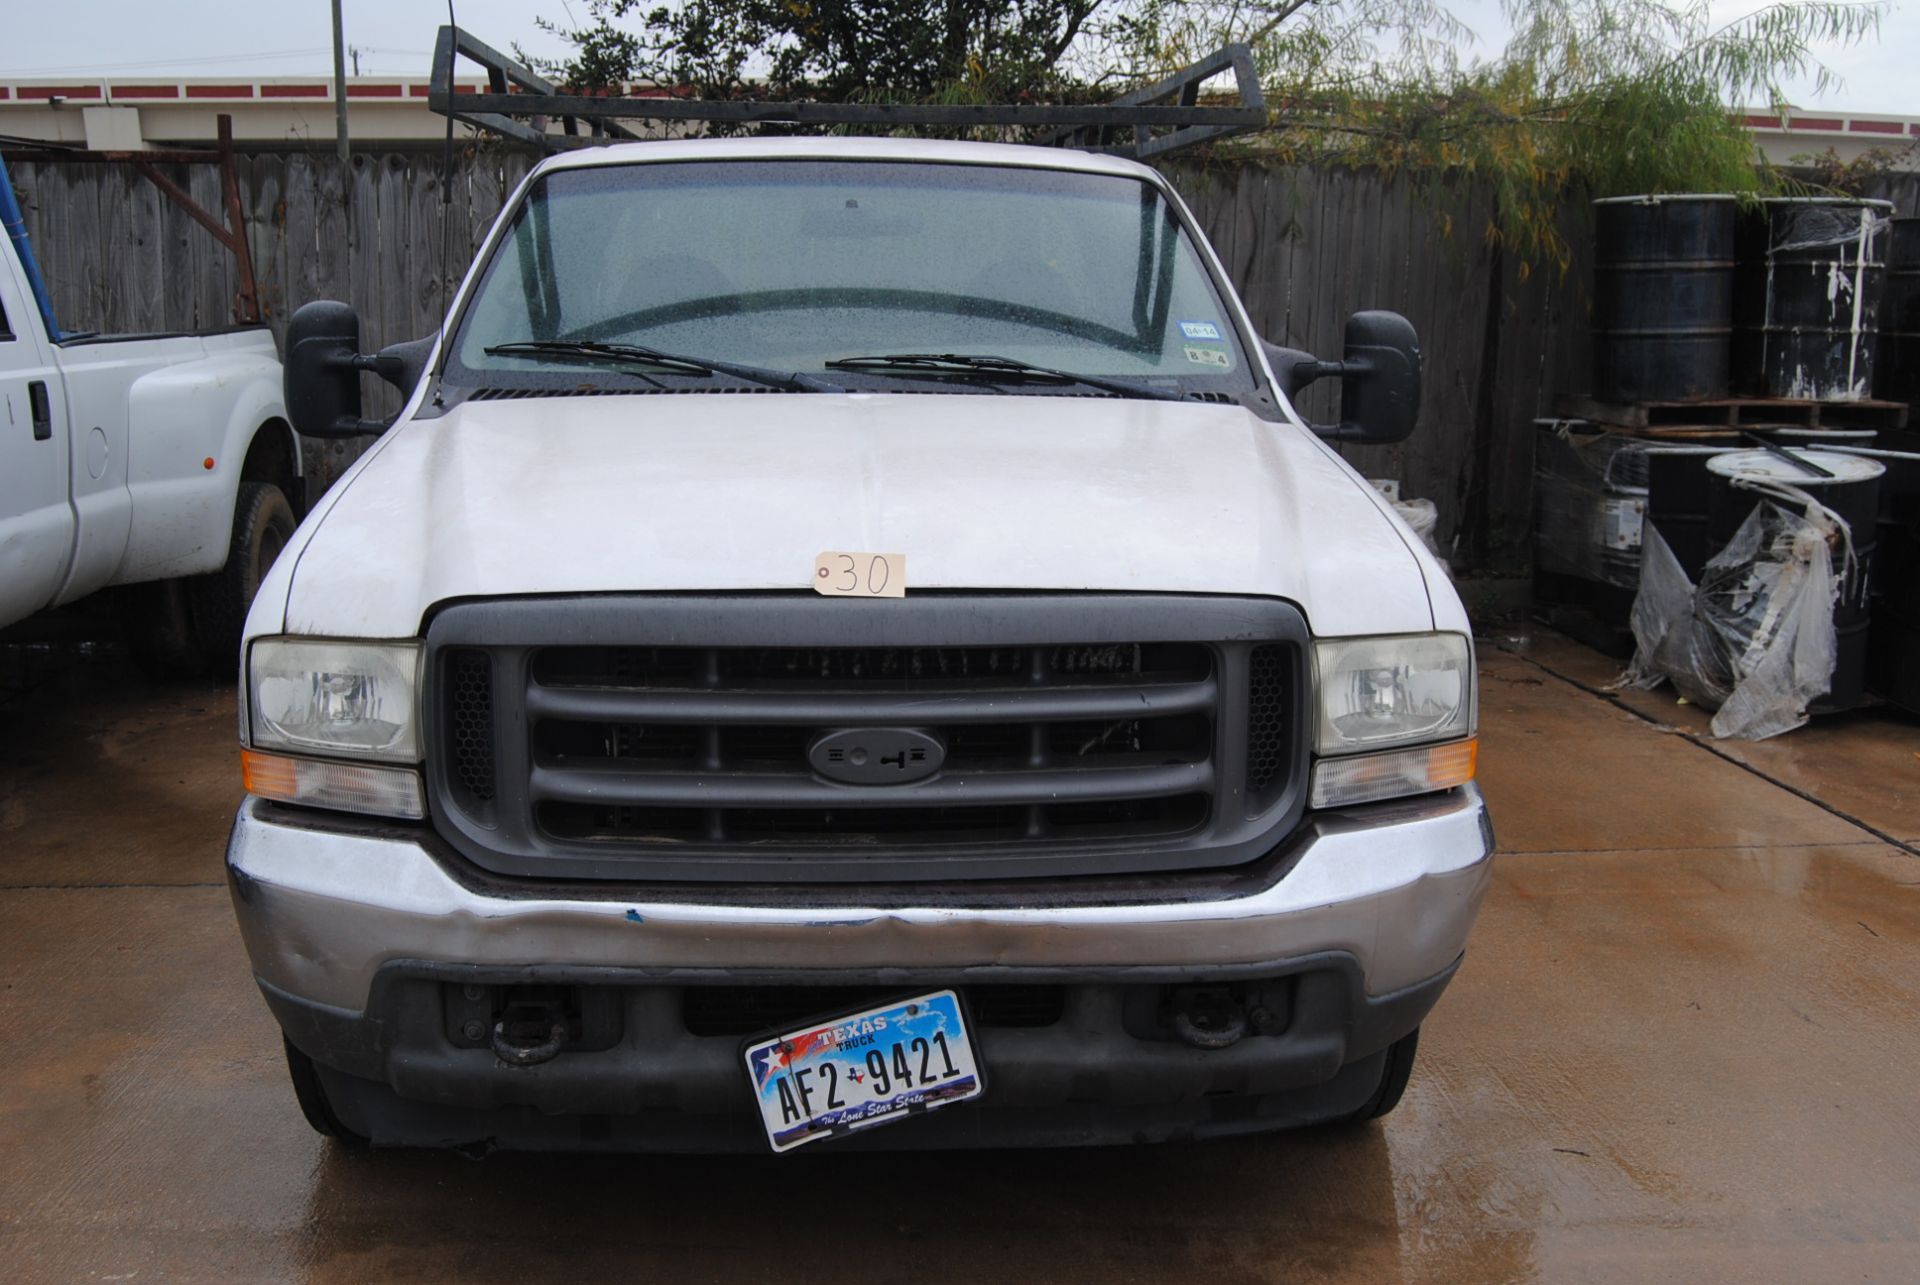 '04 Ford Work Truck F250 Super Duty - Image 2 of 11